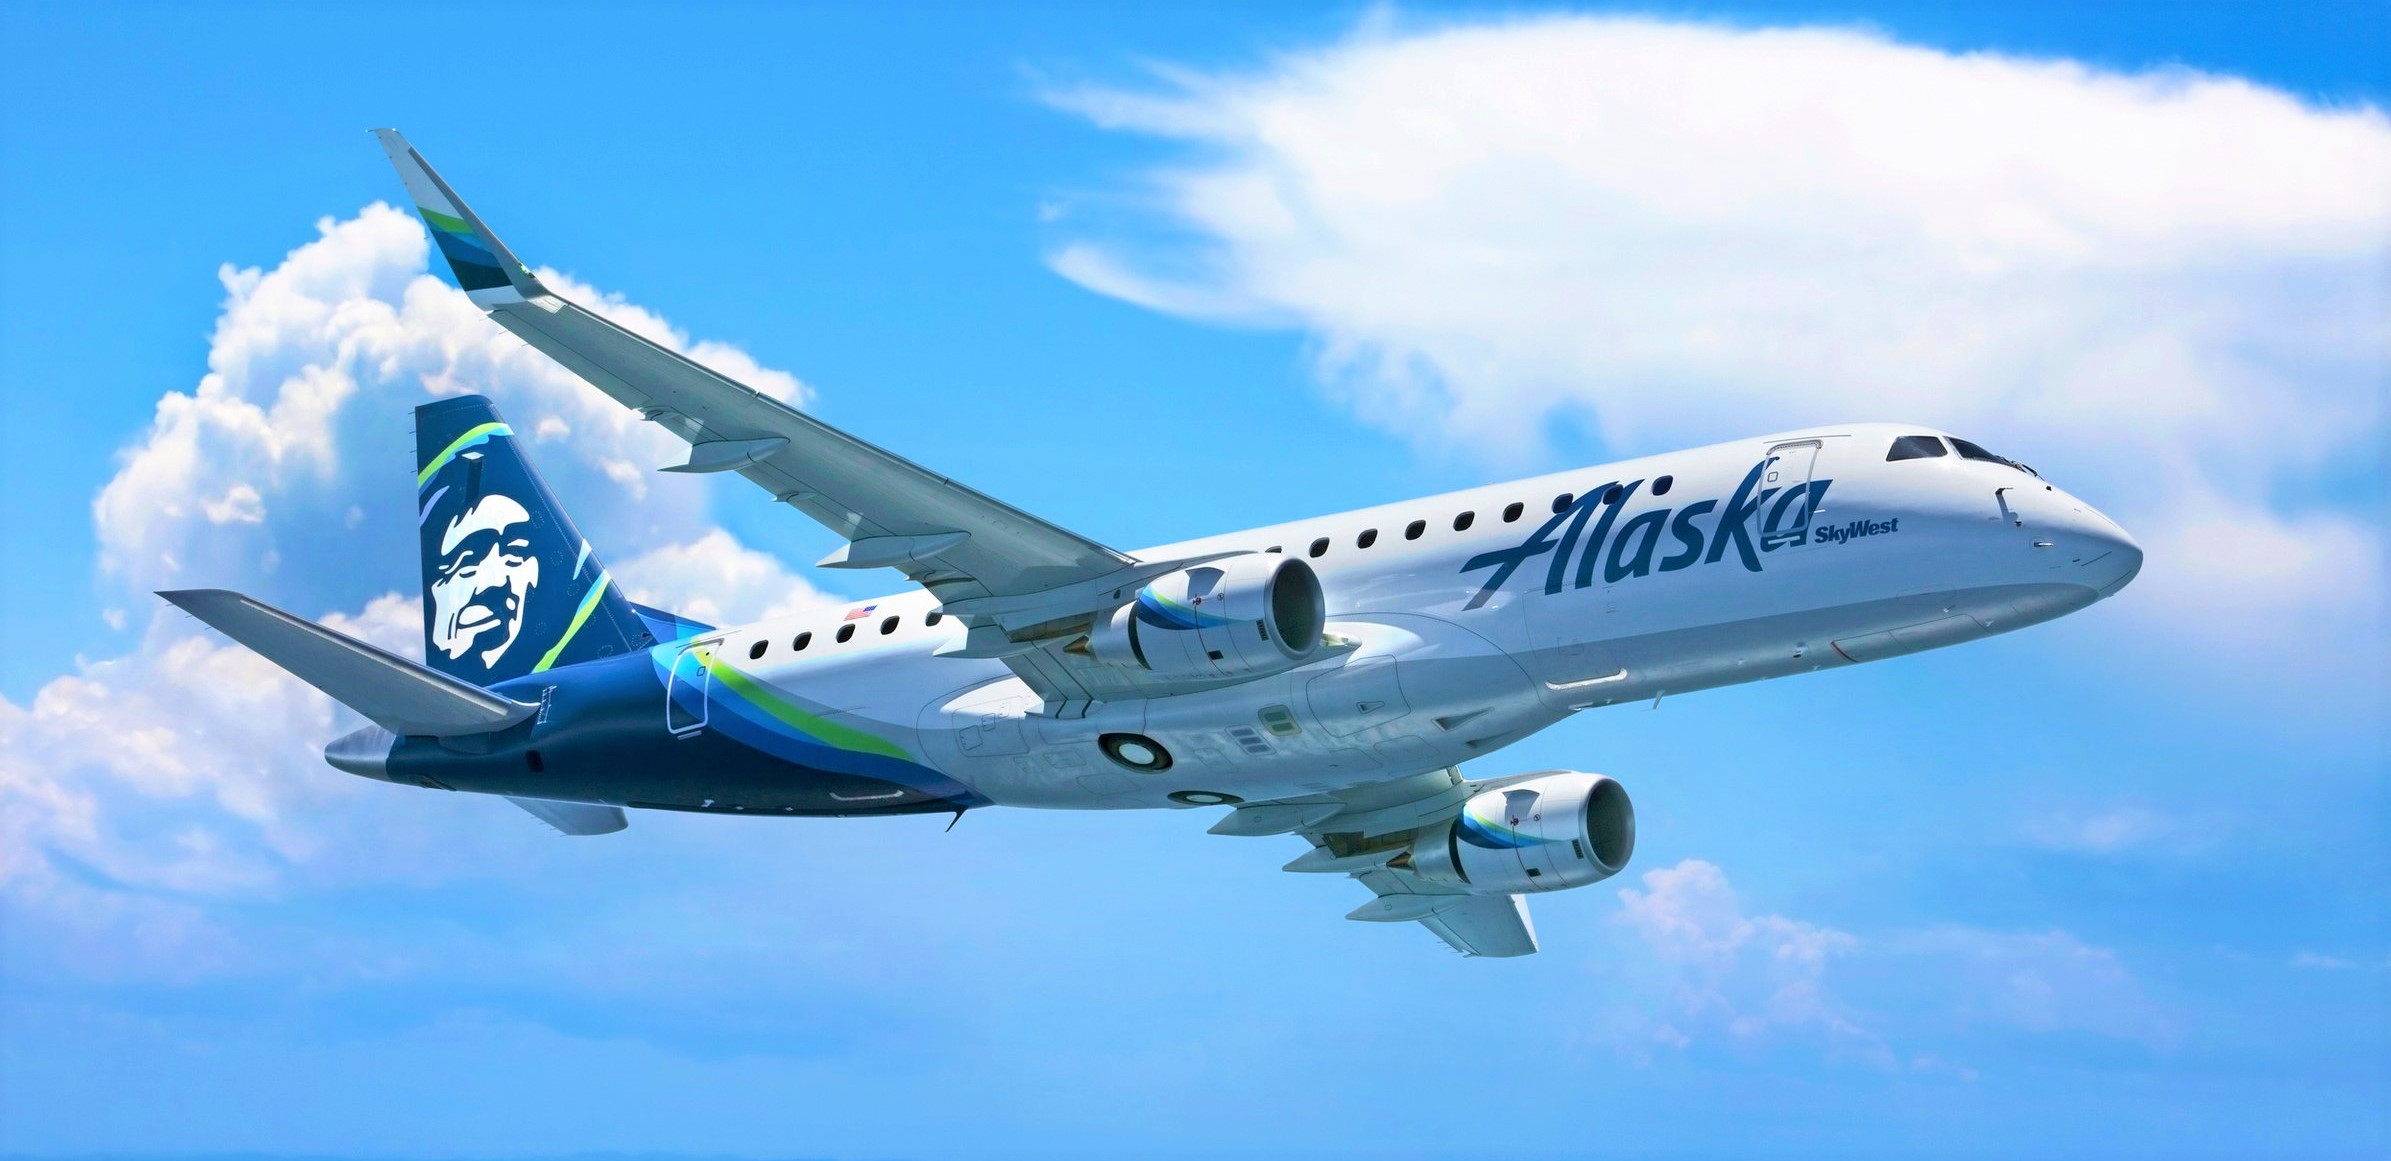 Sky West to acquire eight new Embraer E175 aircrafts to Fly Under Alaska Airlines Livery , taking  it's fleet total  Forty !